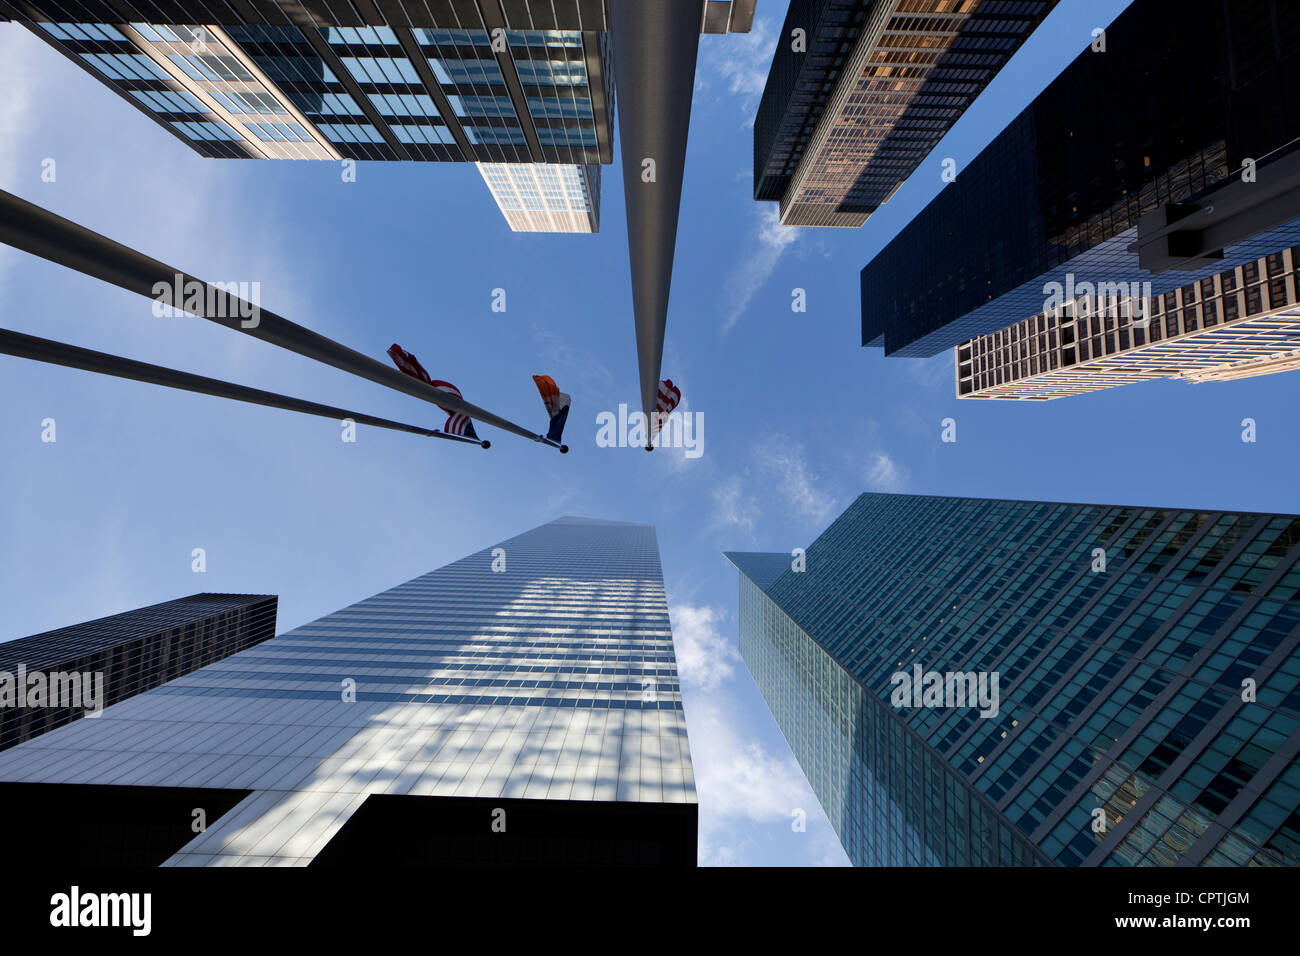 Looking up at skyscrapers in Midtown Manhattan, New York City Stock Photo